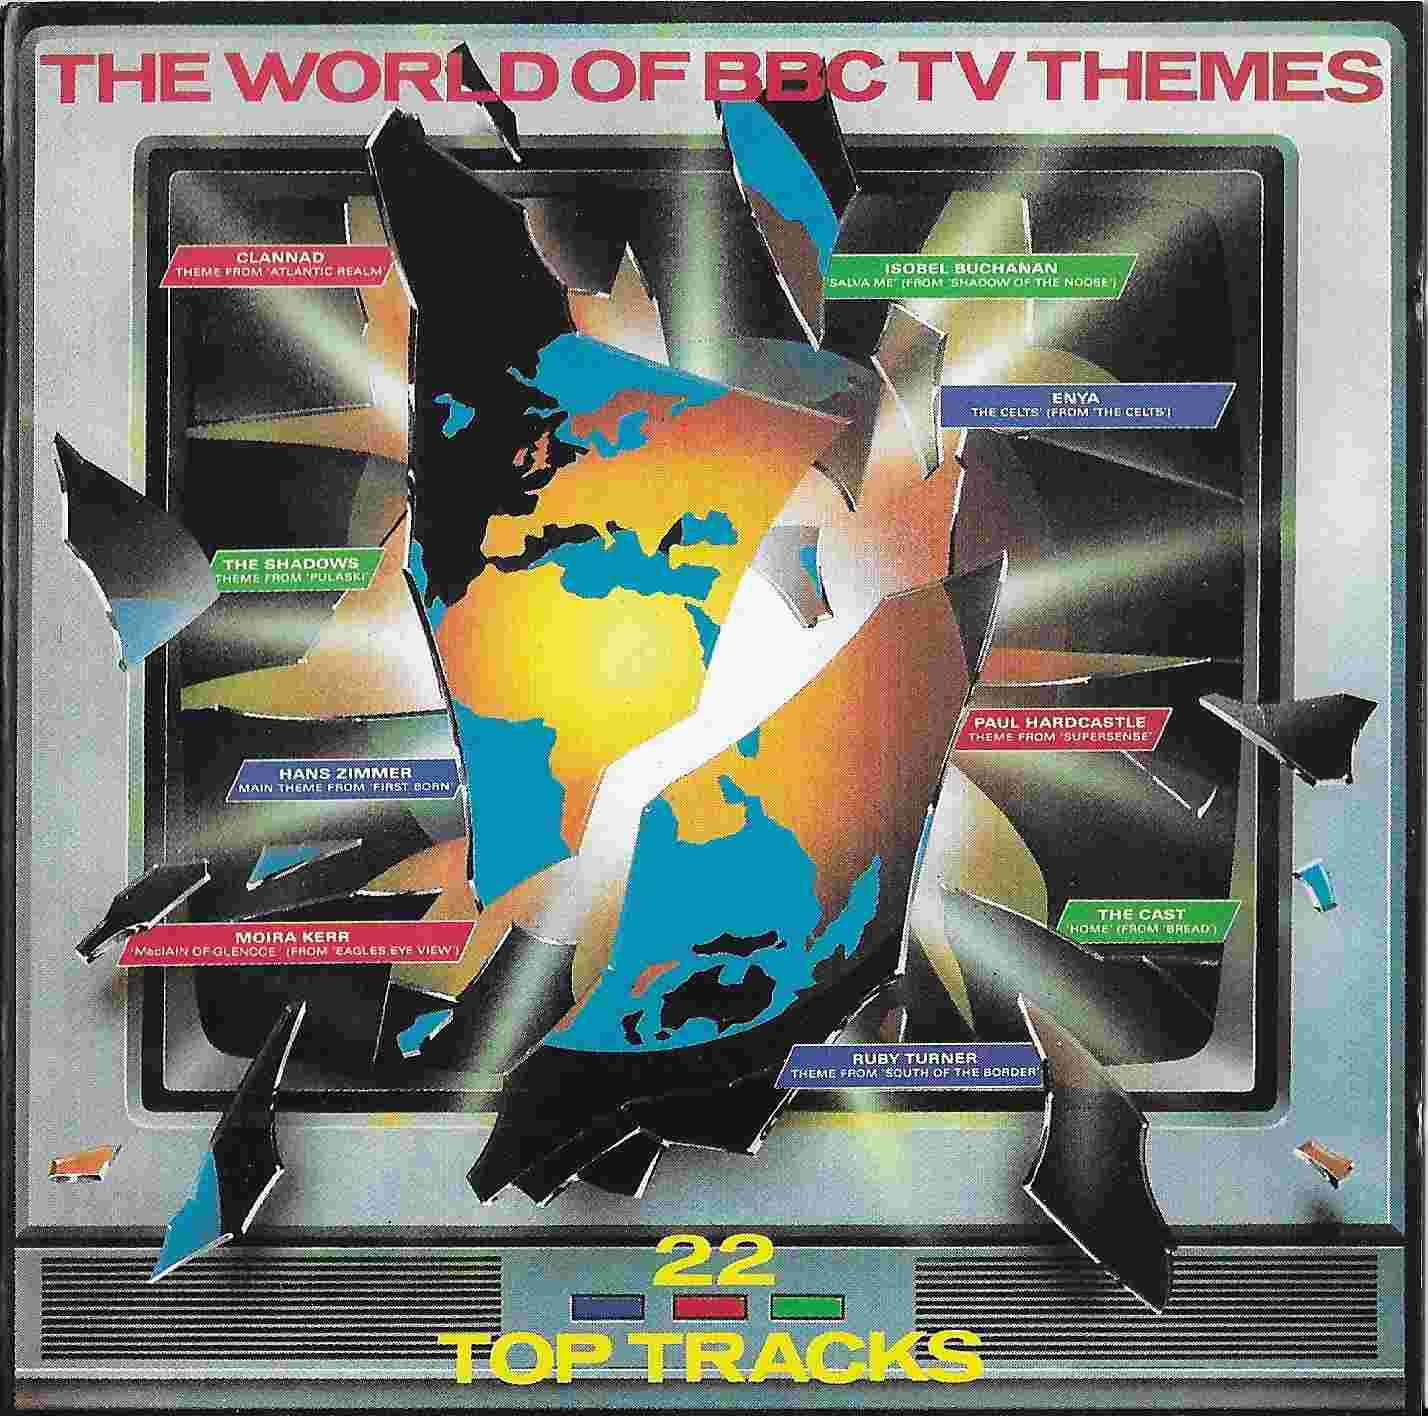 Picture of The World of BBC TV themes by artist Various from the BBC cds - Records and Tapes library